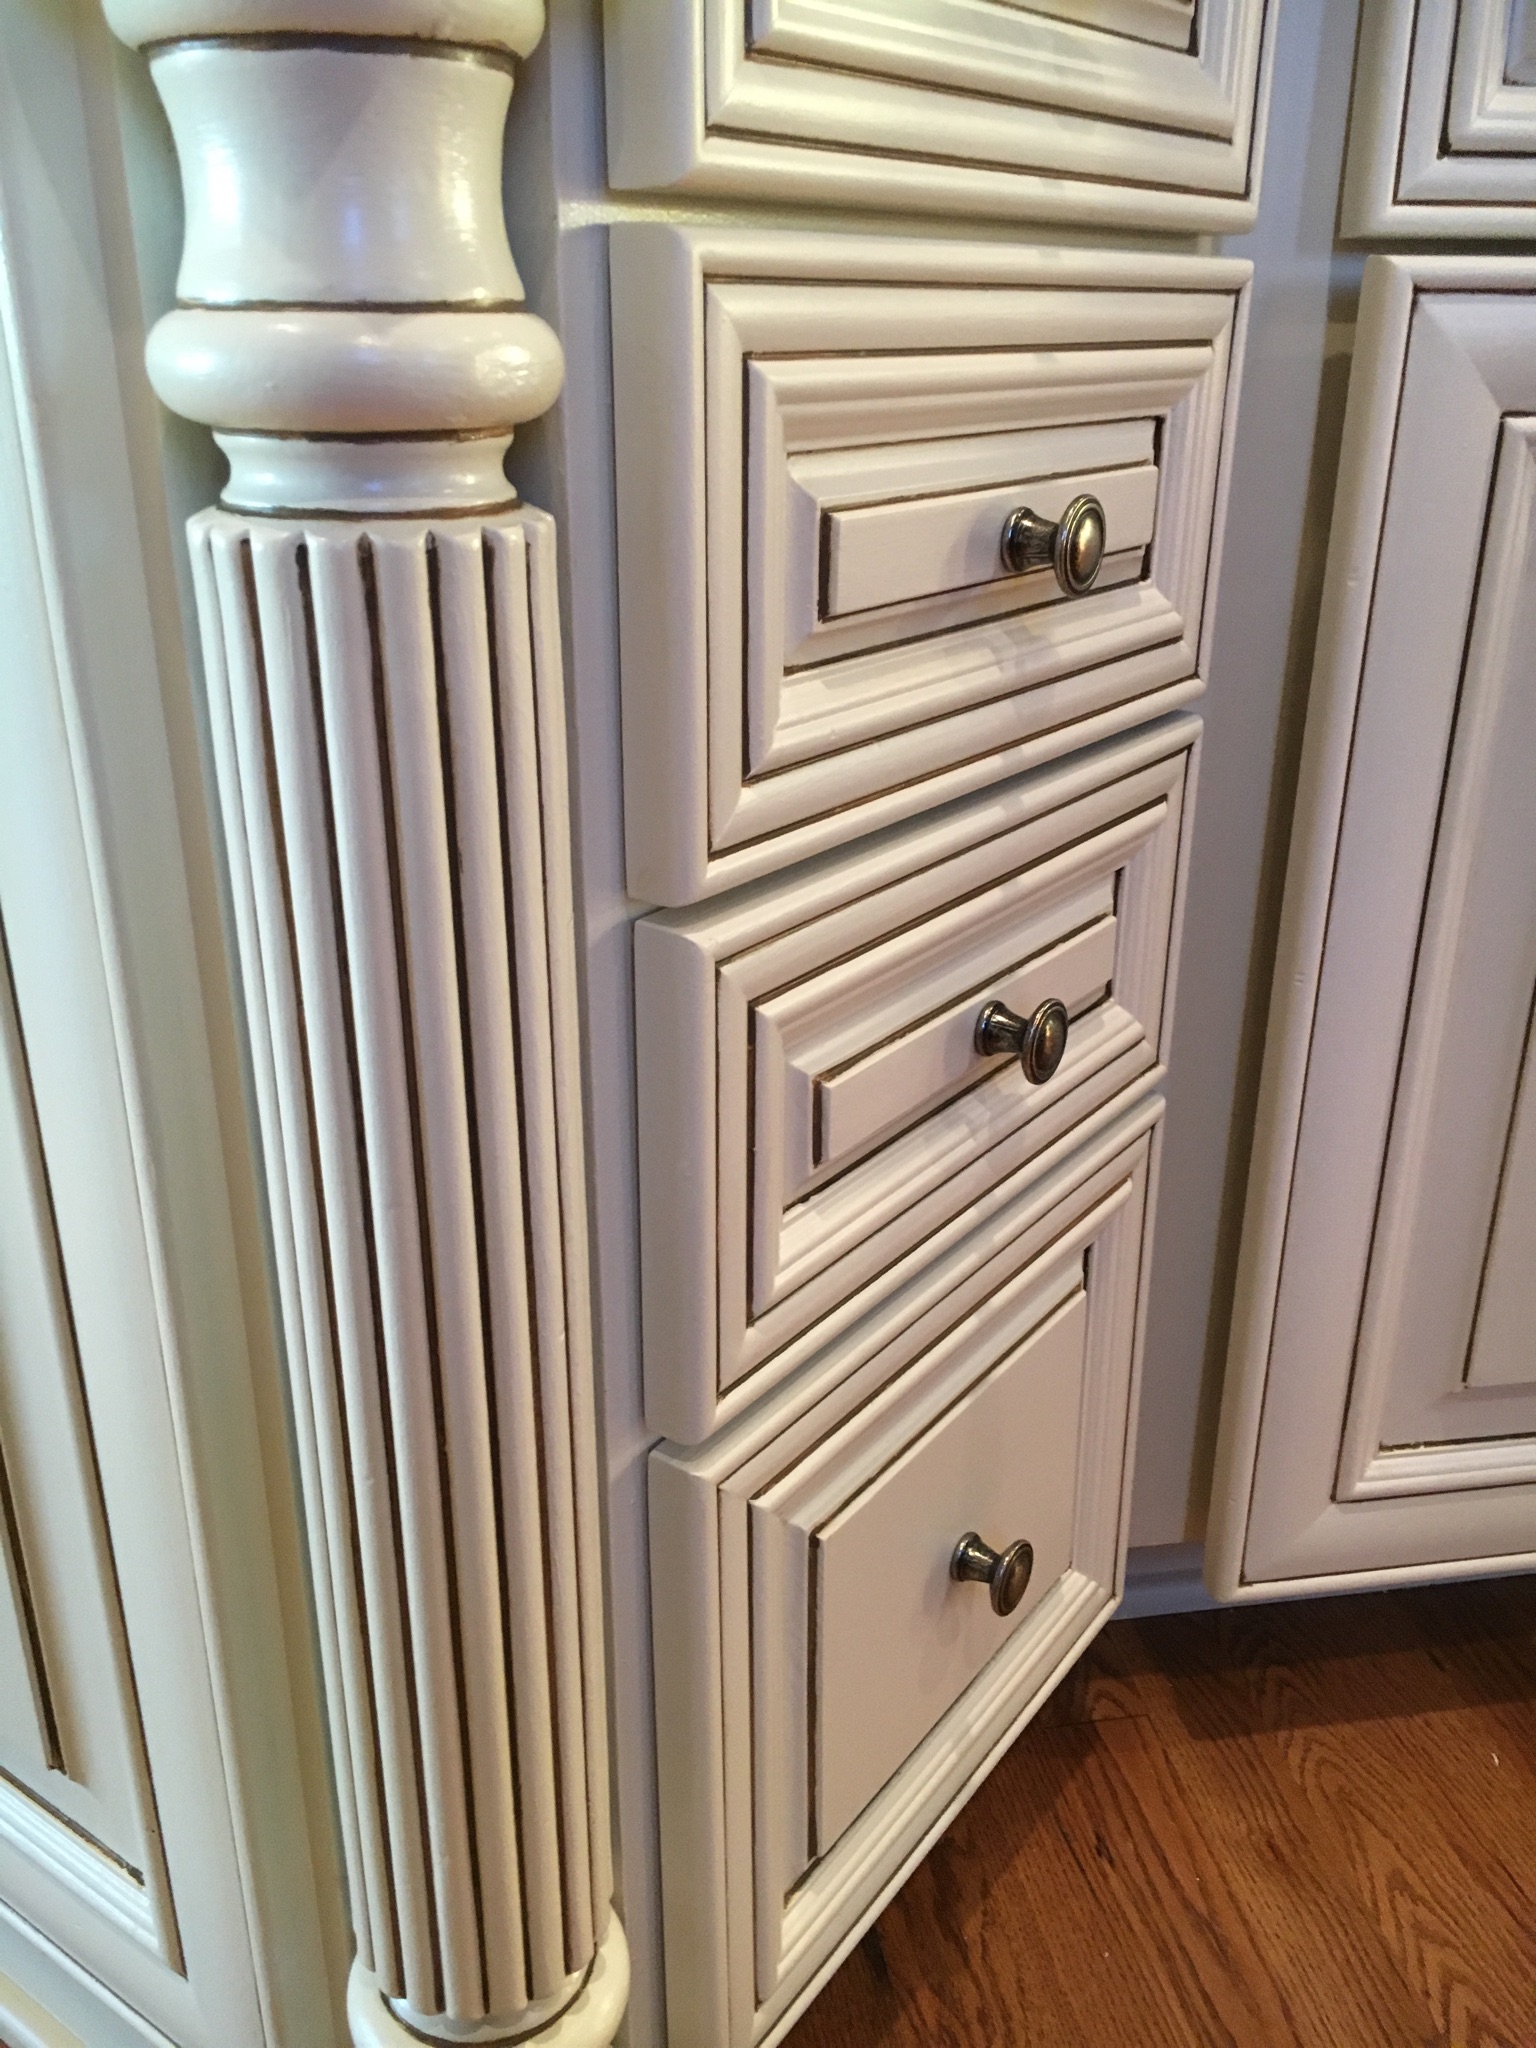  how to use glaze on cabinets